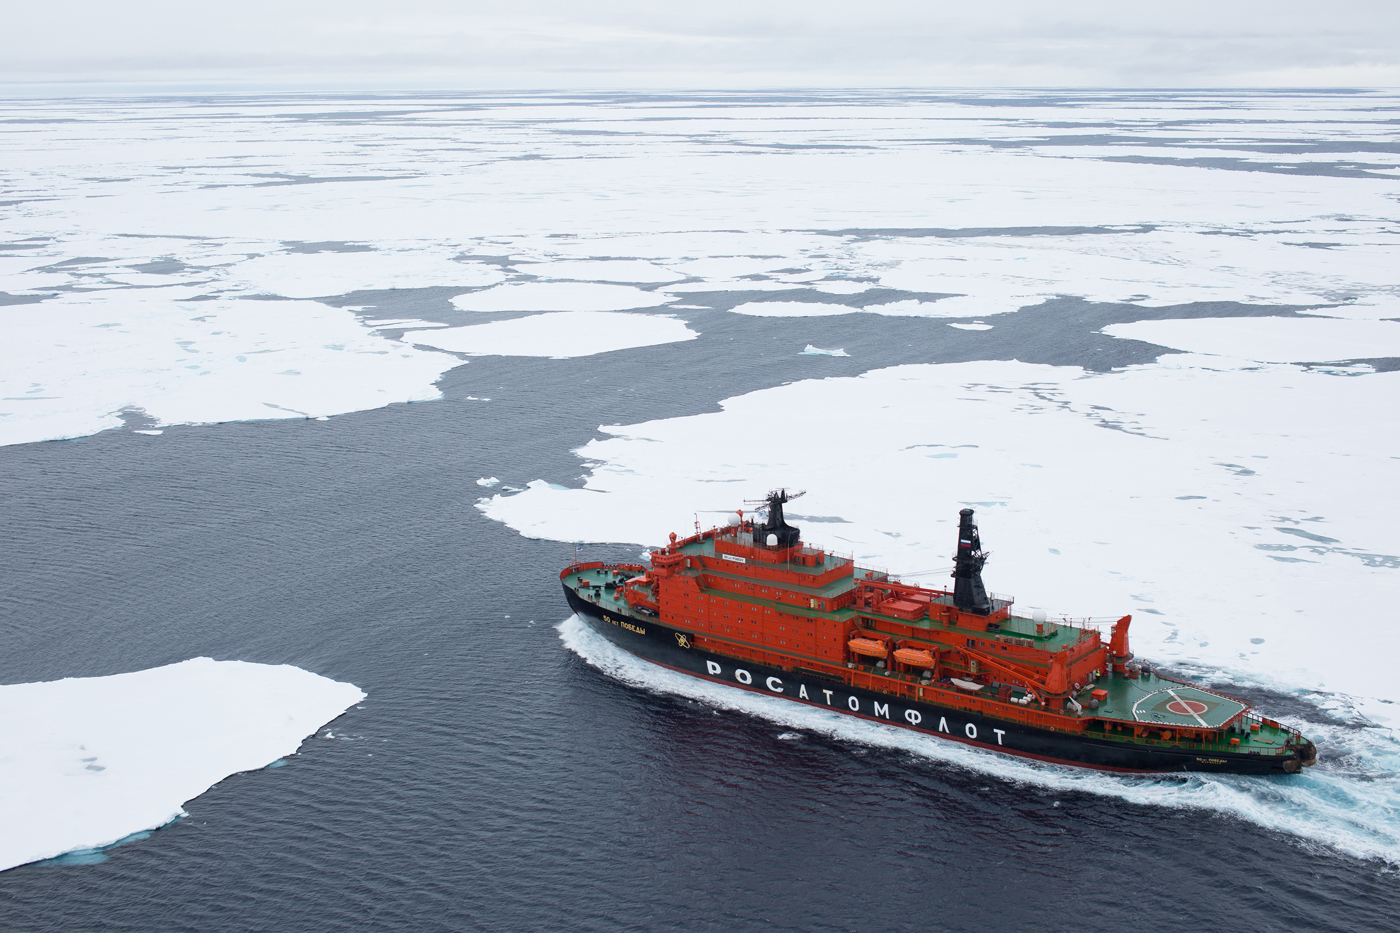 Arctic Cruise to the North Pole